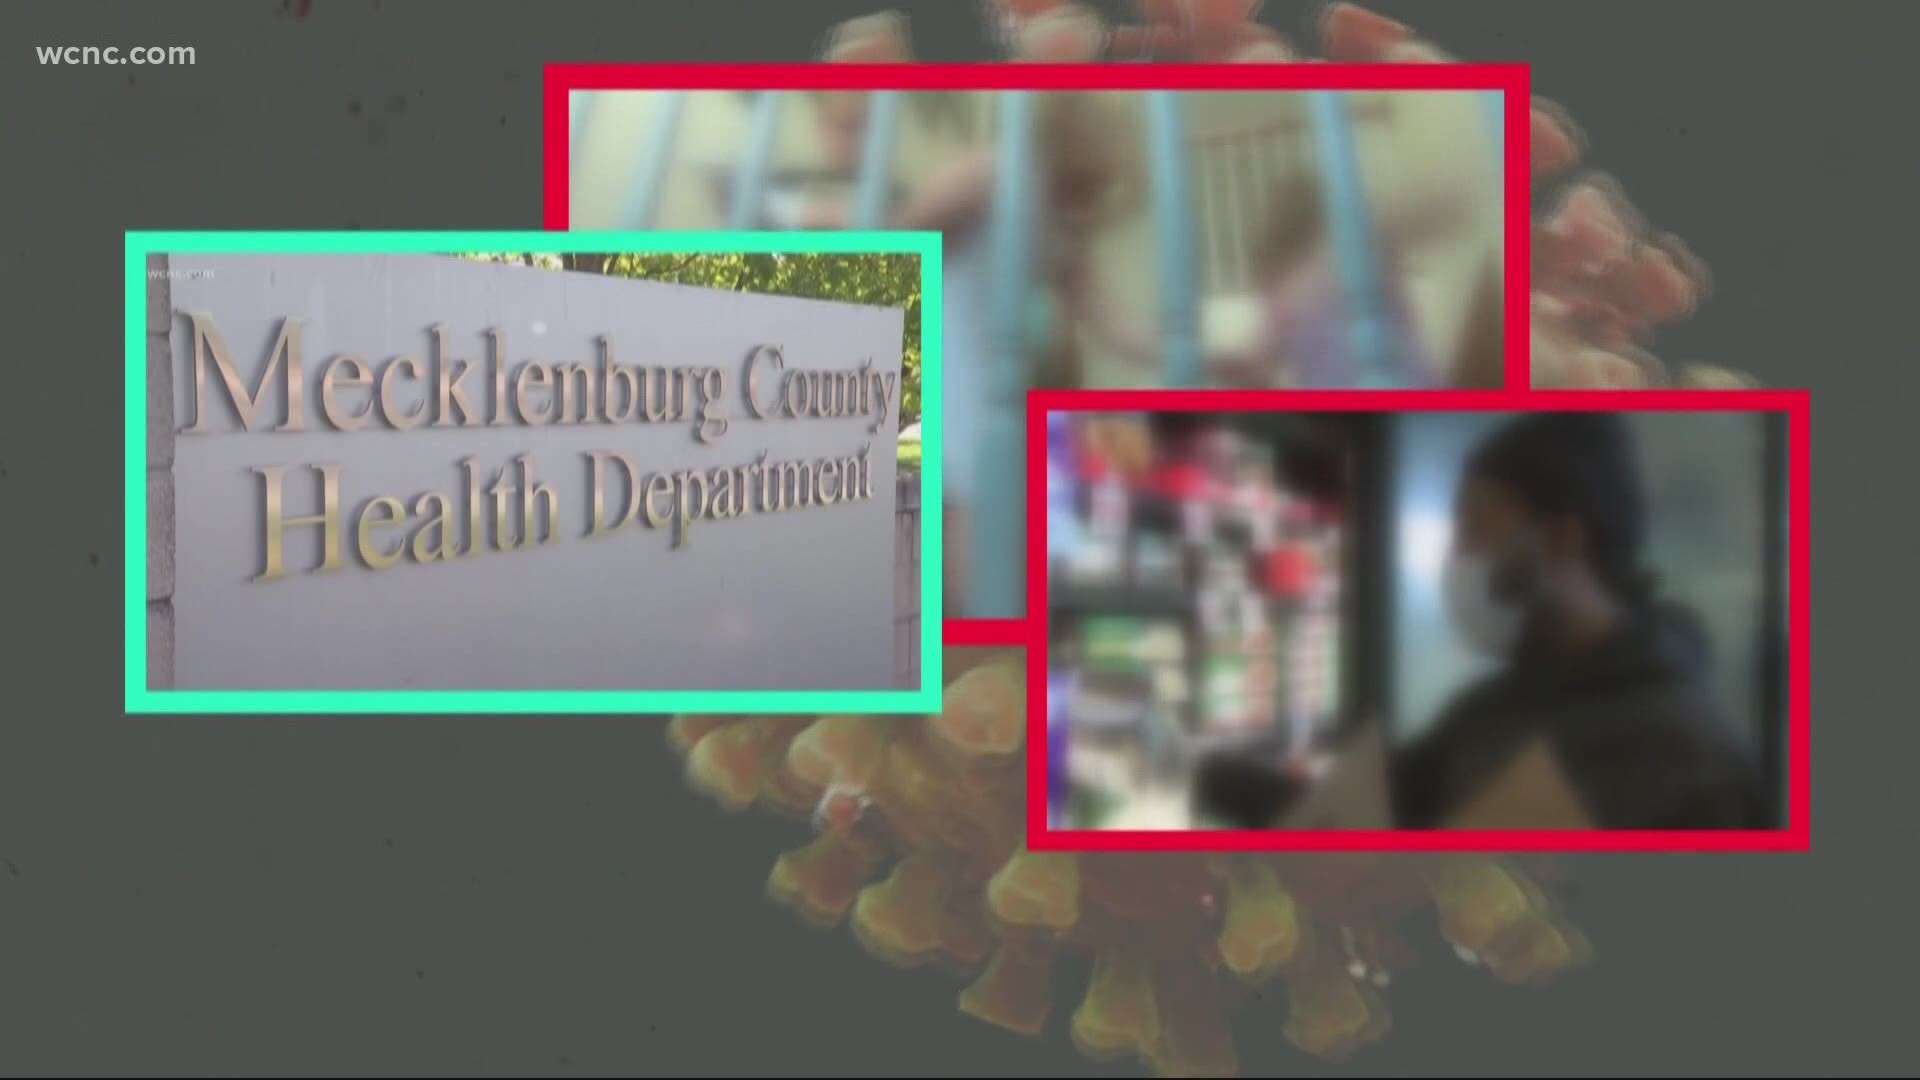 The CDC has sent a team to help with the rising numbers in Mecklenburg County.